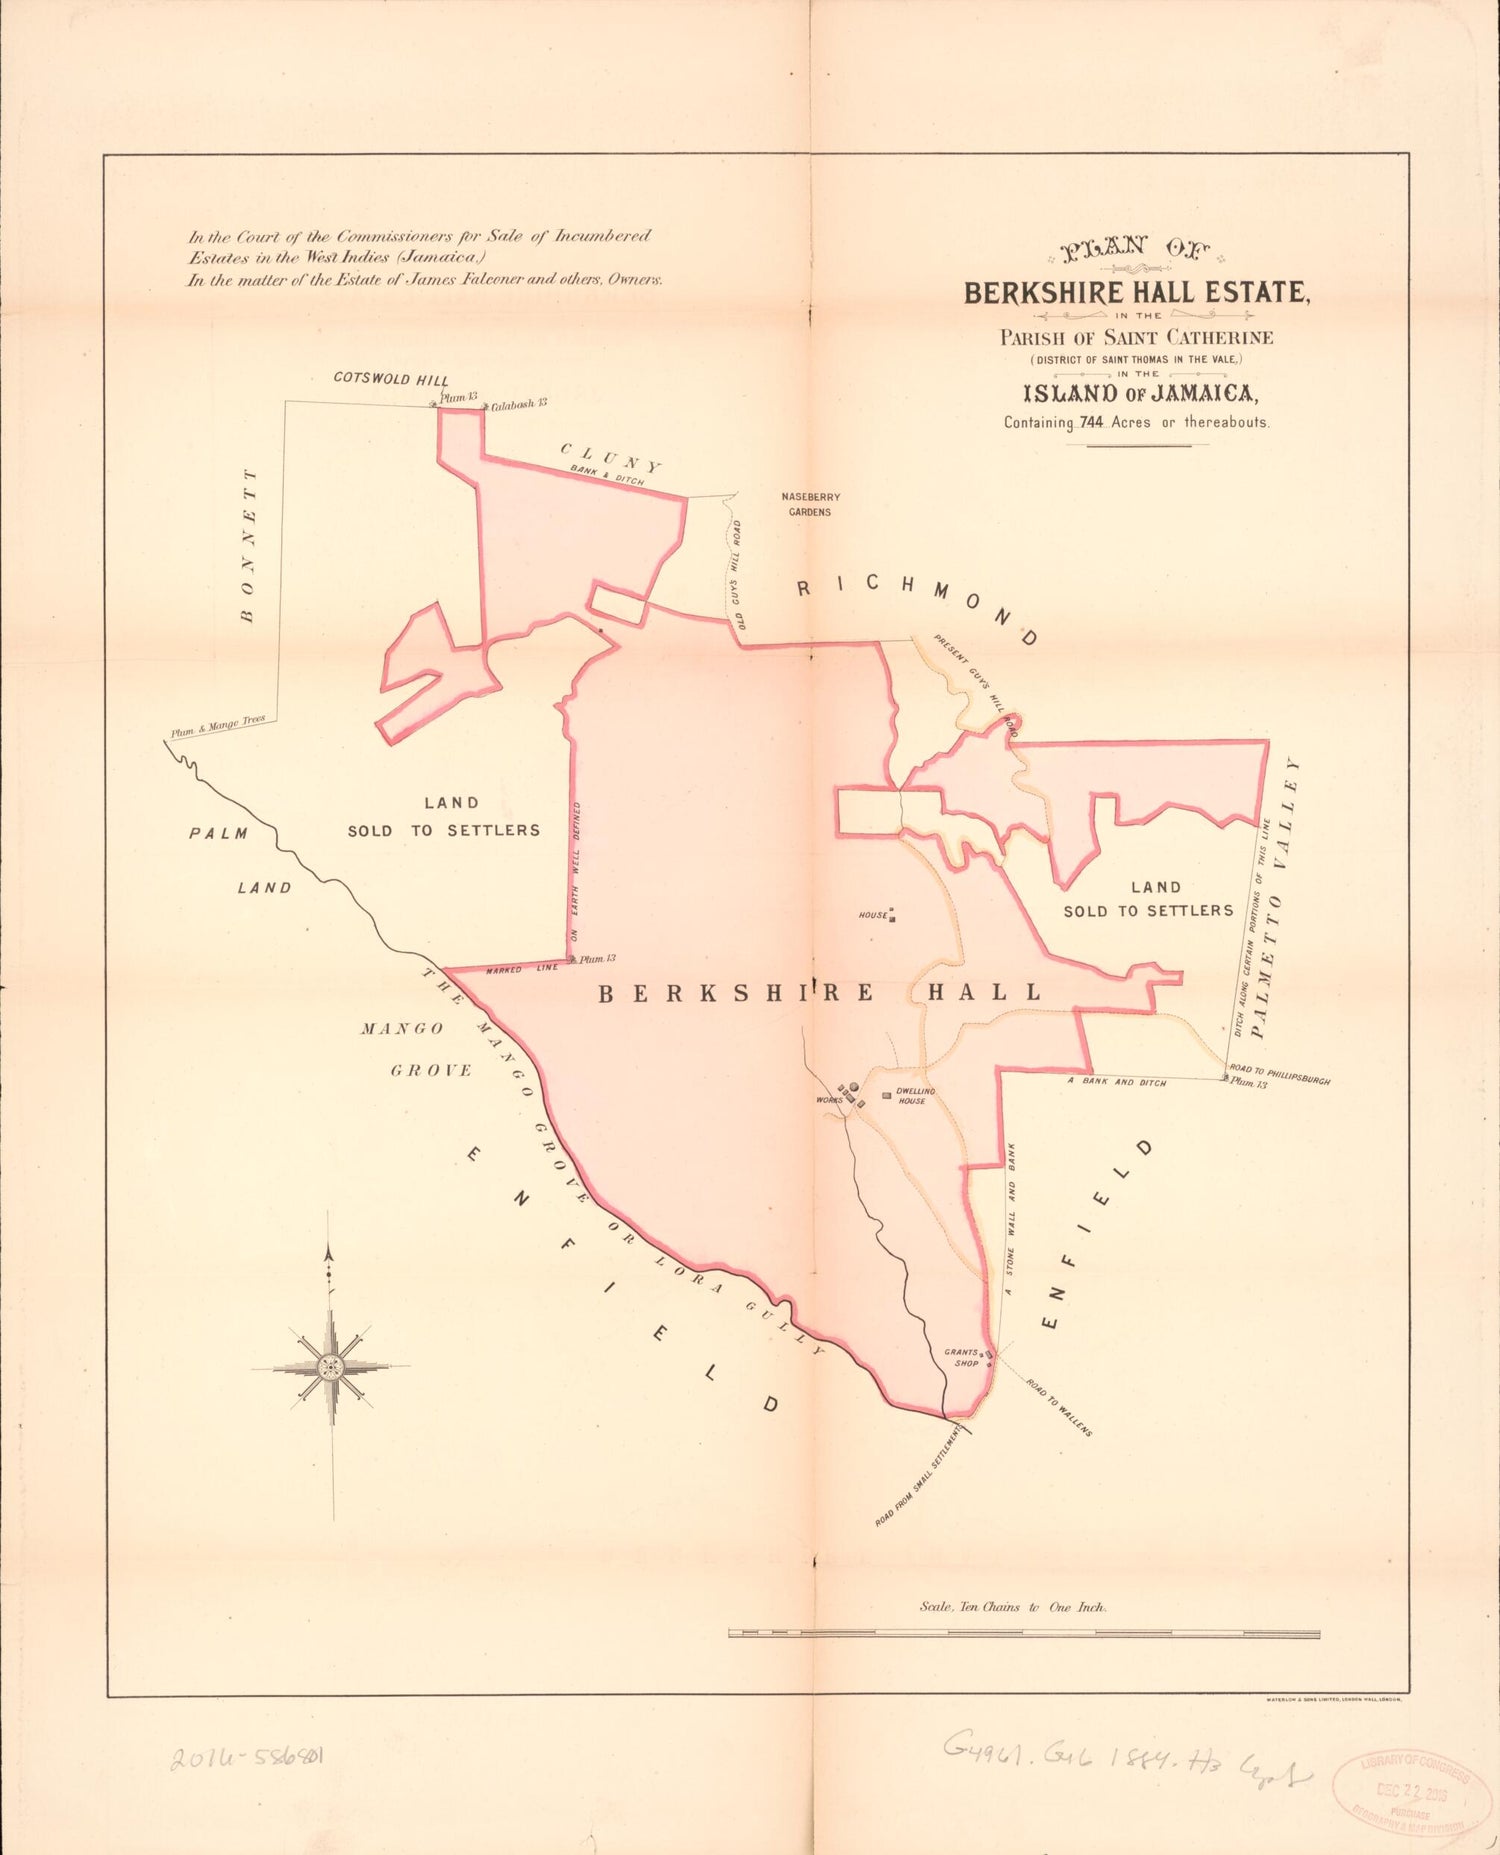 This old map of Plan of Berkshire Hall Estate from Encumbered Estates In the West Indies (Jamaica) from 1884 was created by Vaughan &amp; Jenkinson (Firm) Hards in 1884